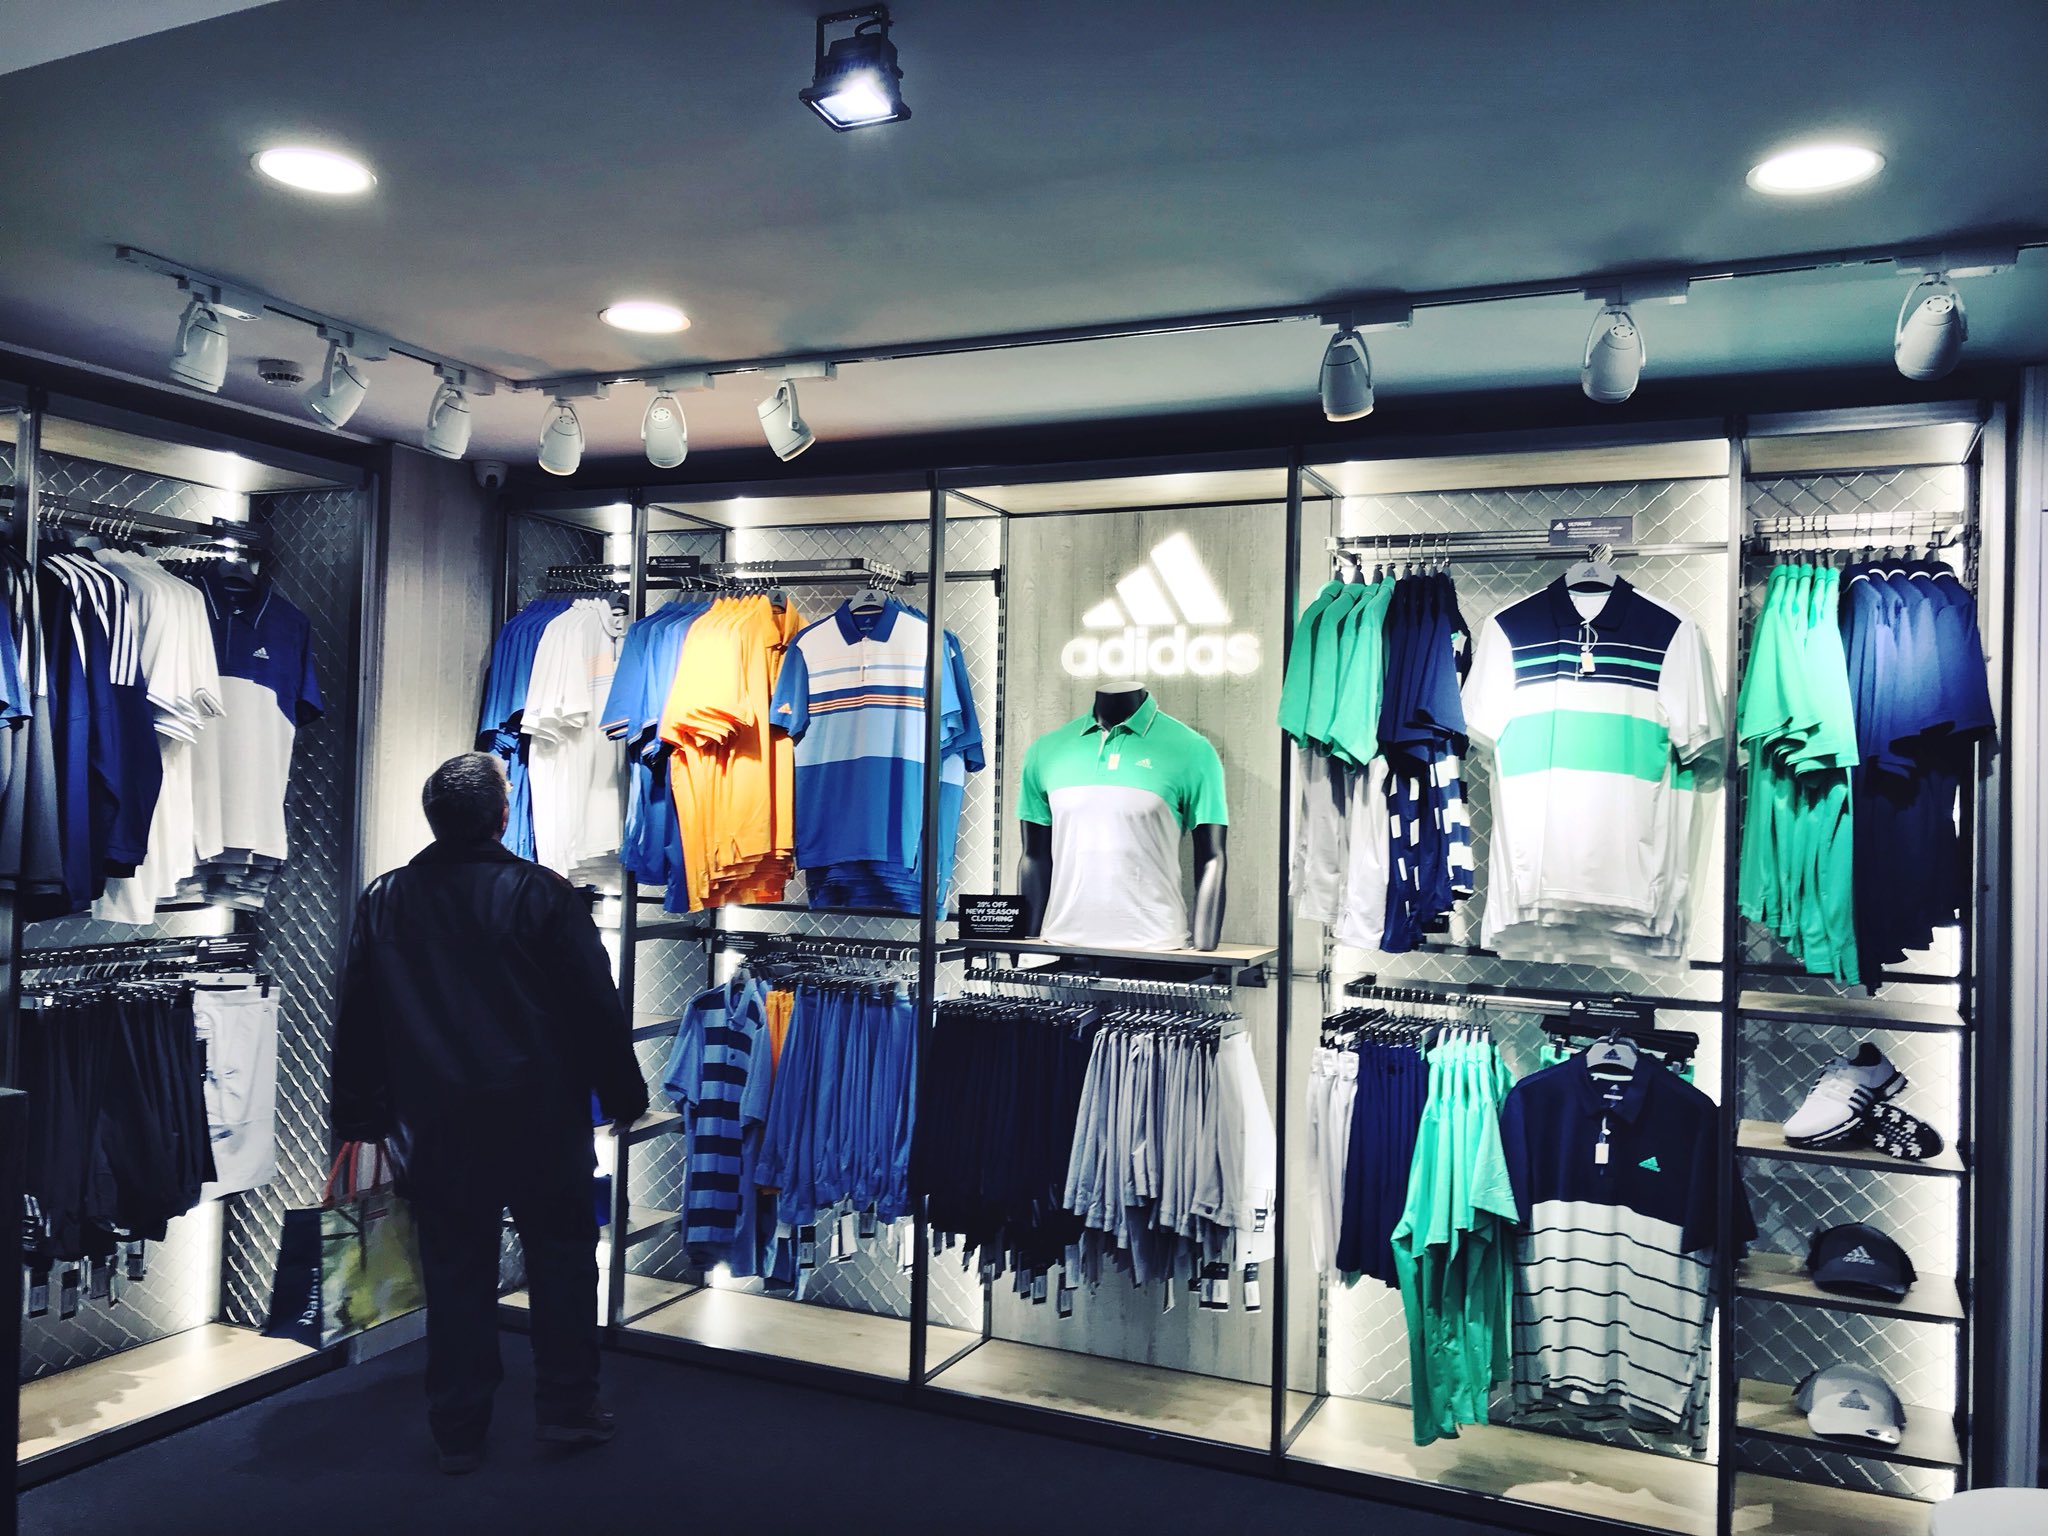 stimulere Vend om hit Silvermere Golf on Twitter: "The finished article. New @adidasGolf bespoke  shop-in-shop complete + stocked with looks from the year's first major.  https://t.co/sevn3laN1x" / X